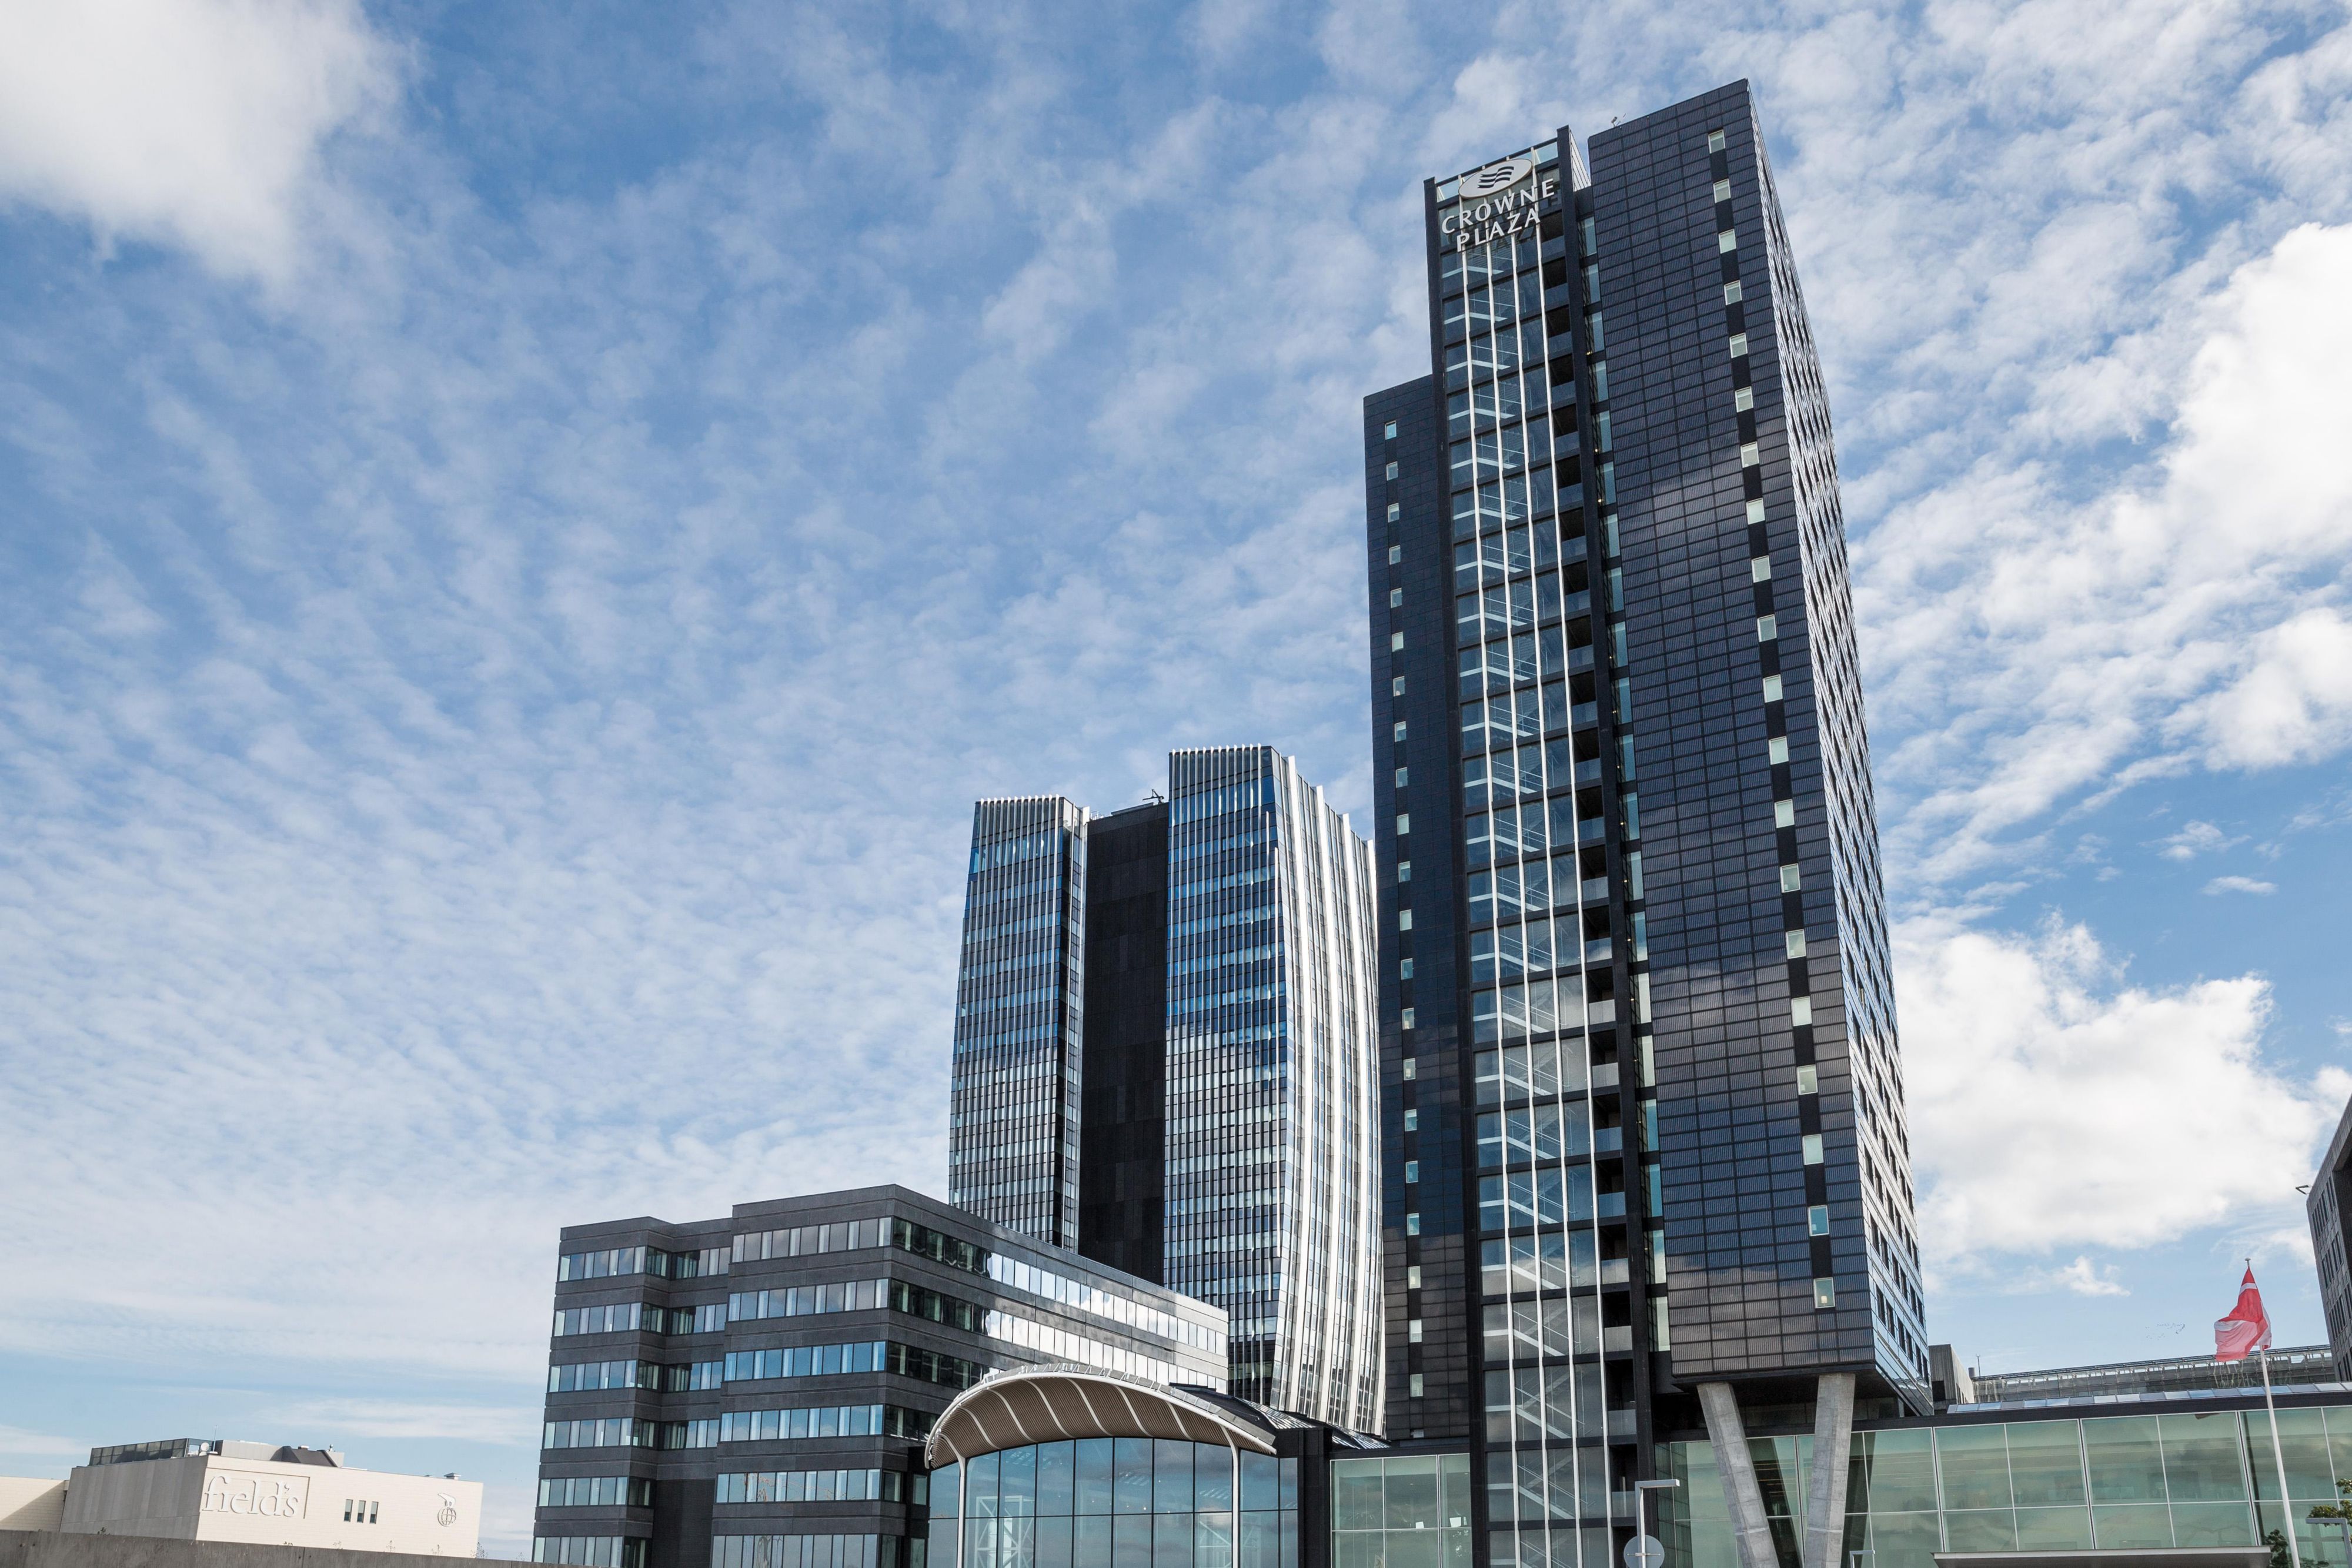 Crowne Plaza Copenhagen Towers is covered with solar panels